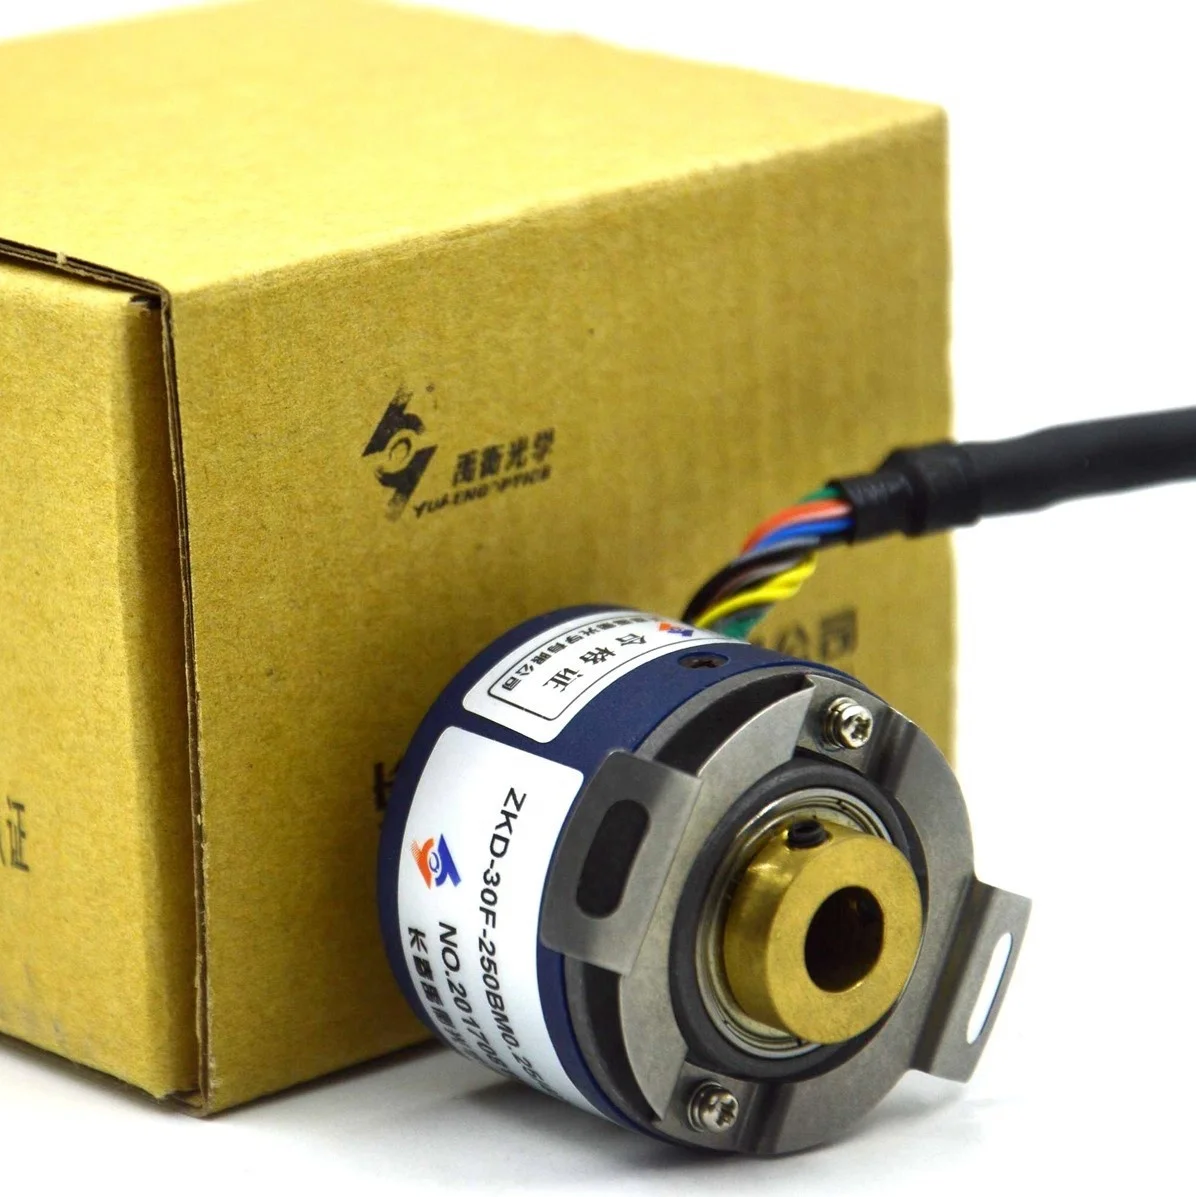 

ZKD-30F-250BM0.25/4P-G05L-B-0.6m YUHENG Hollow shaft rotary encoder New original genuine goods are available from stock